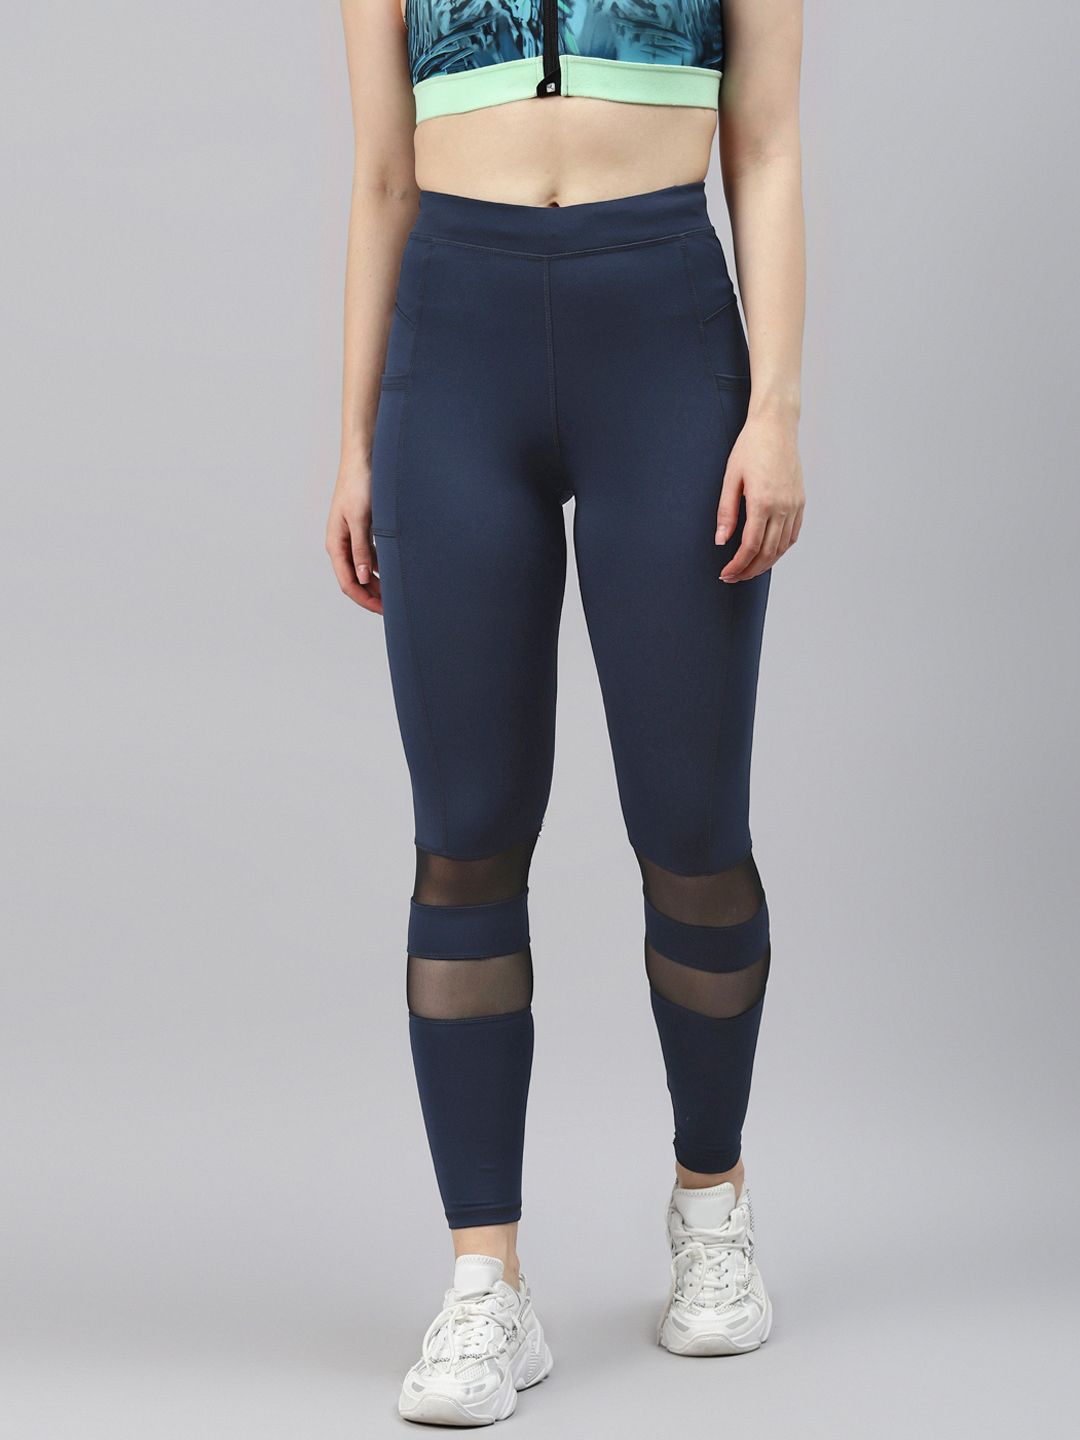 Blinkin Women Navy Blue Solid Mesh Paneled Gym Tights Price in India